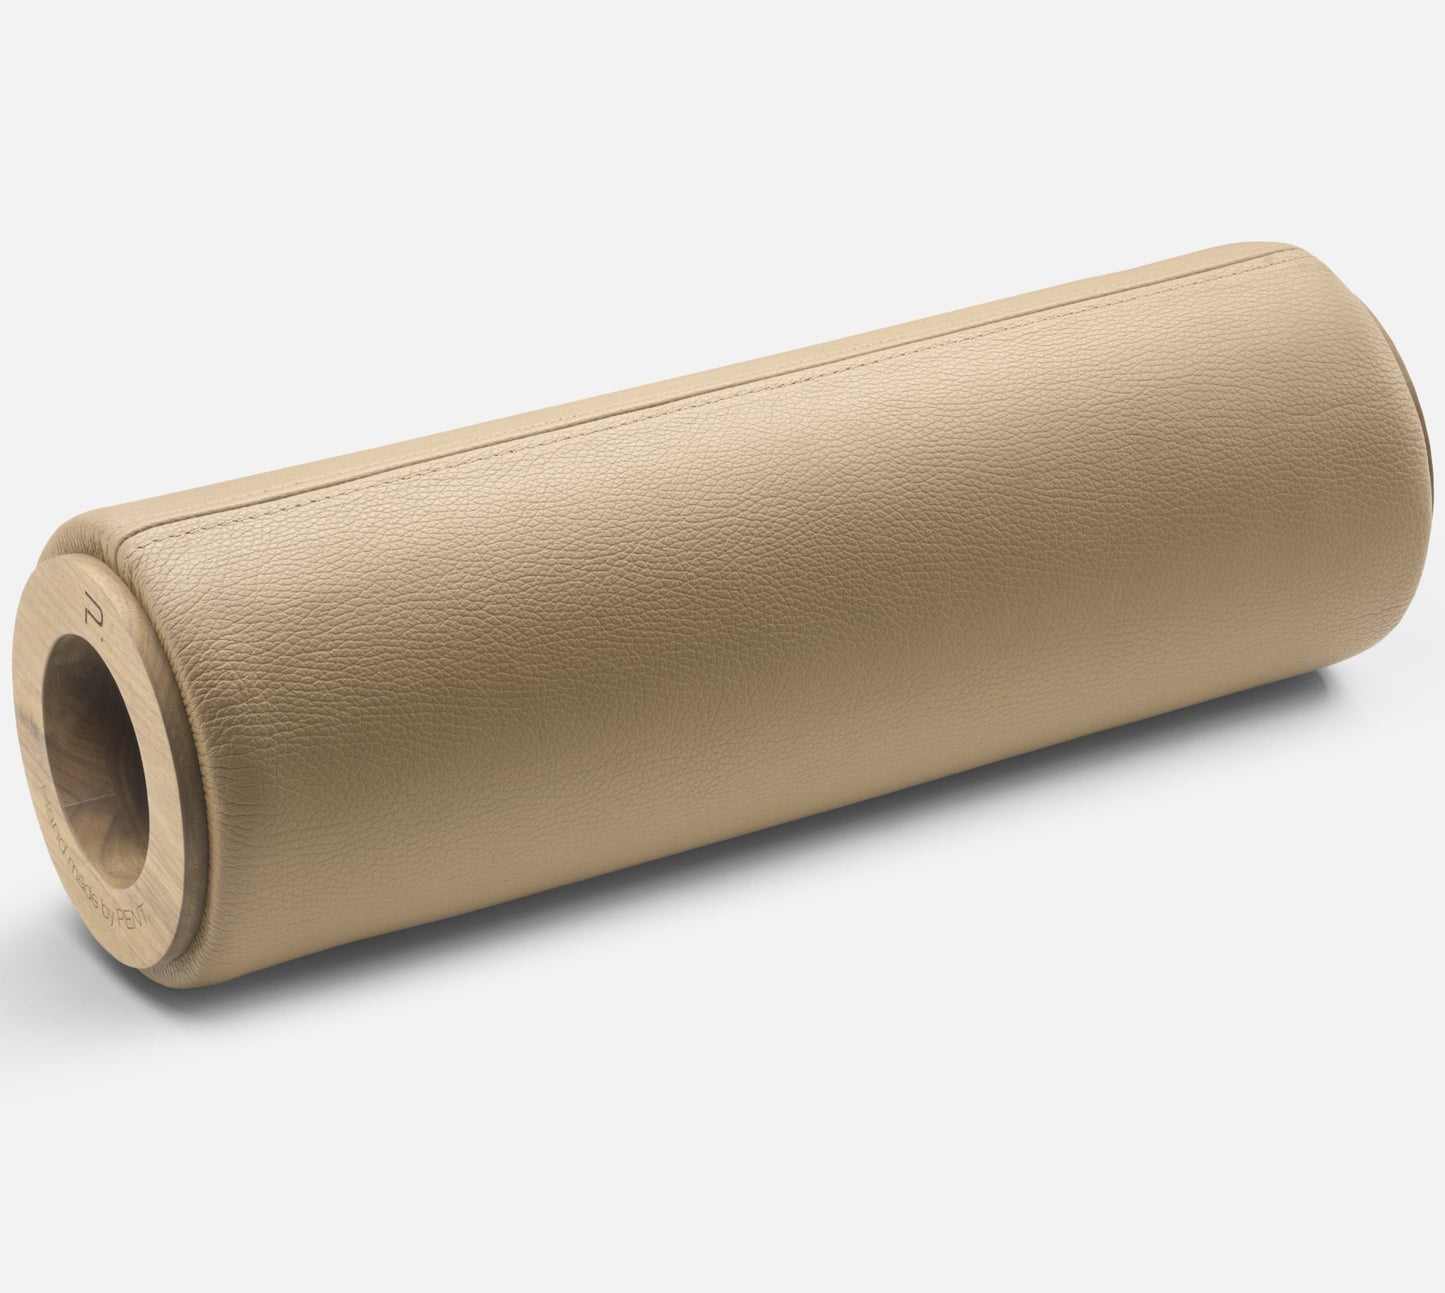 PENT ROLA - Stretching Roller. Luxury Foam Roller. Tension release. bespoke handmade luxury leather soft roller. Cycling Bears.